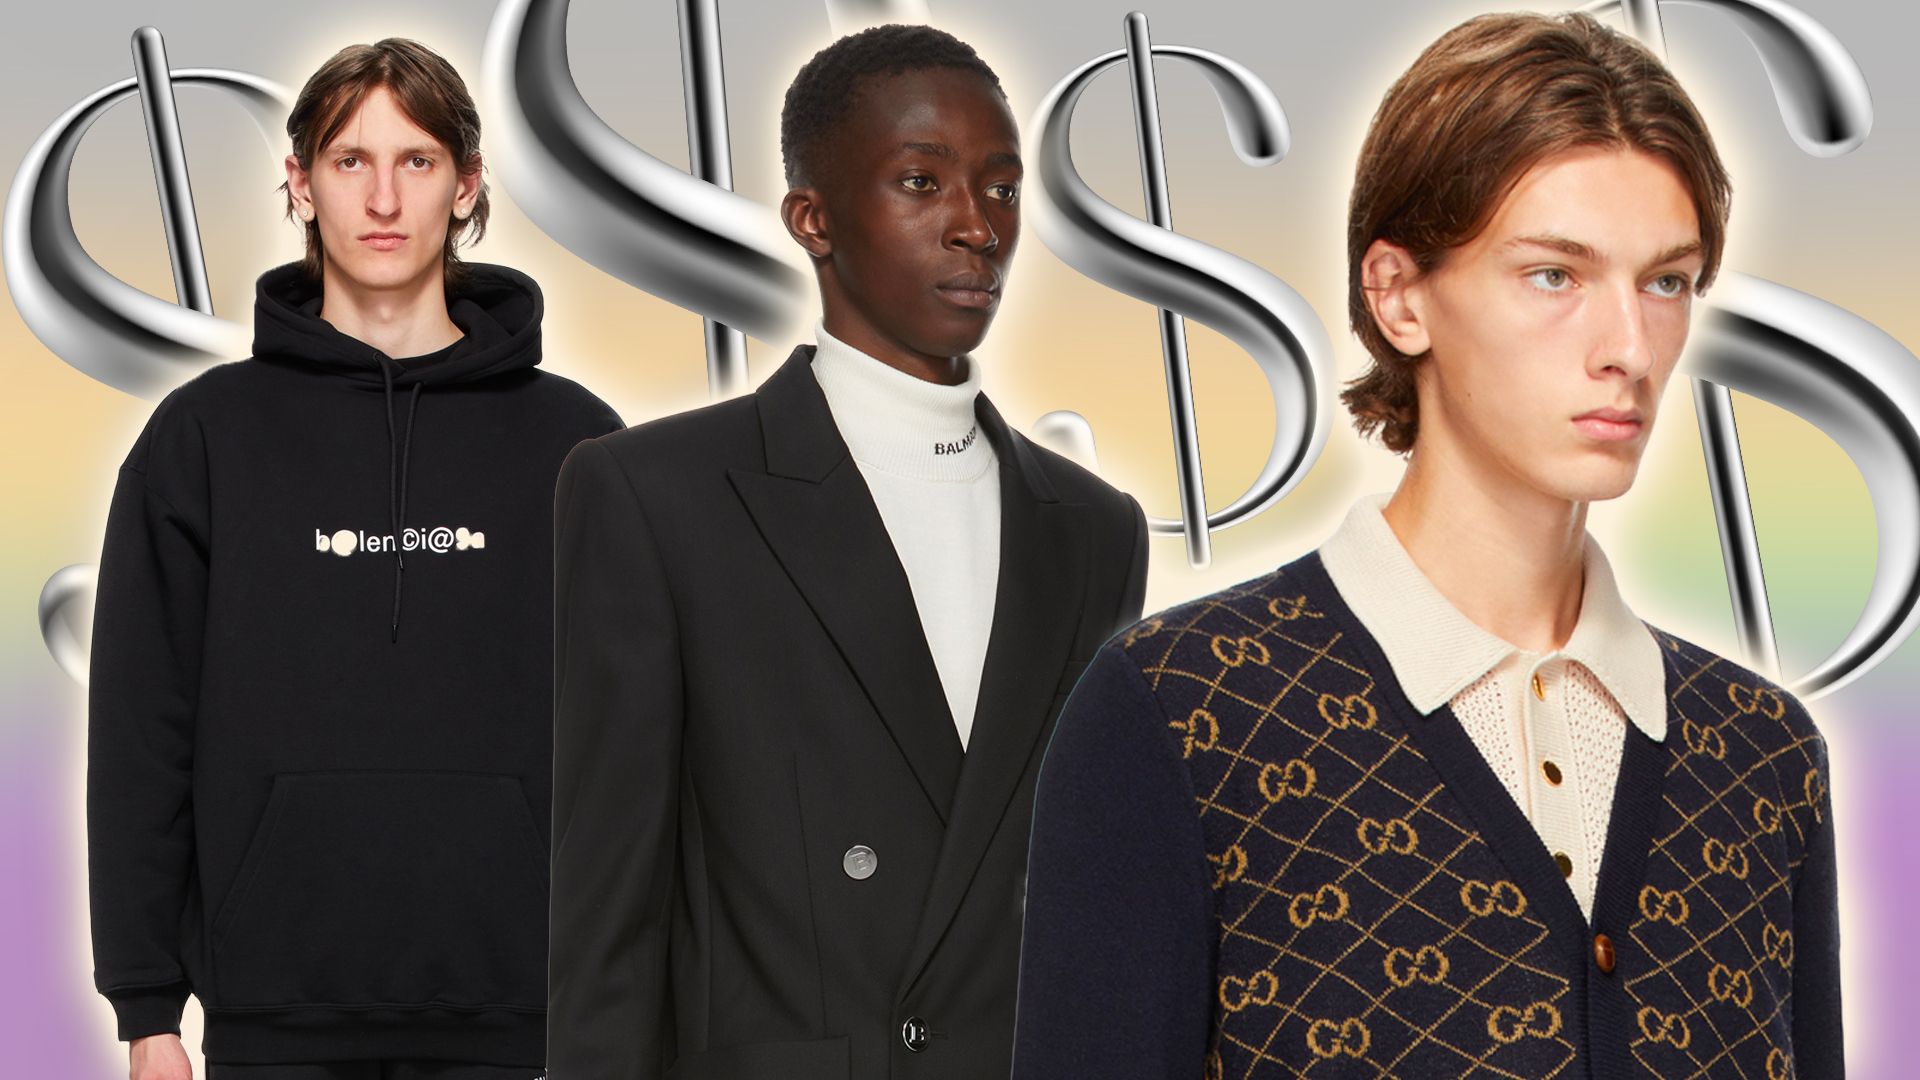 Here Is The Only Good Pricing Strategy For Luxury Brands